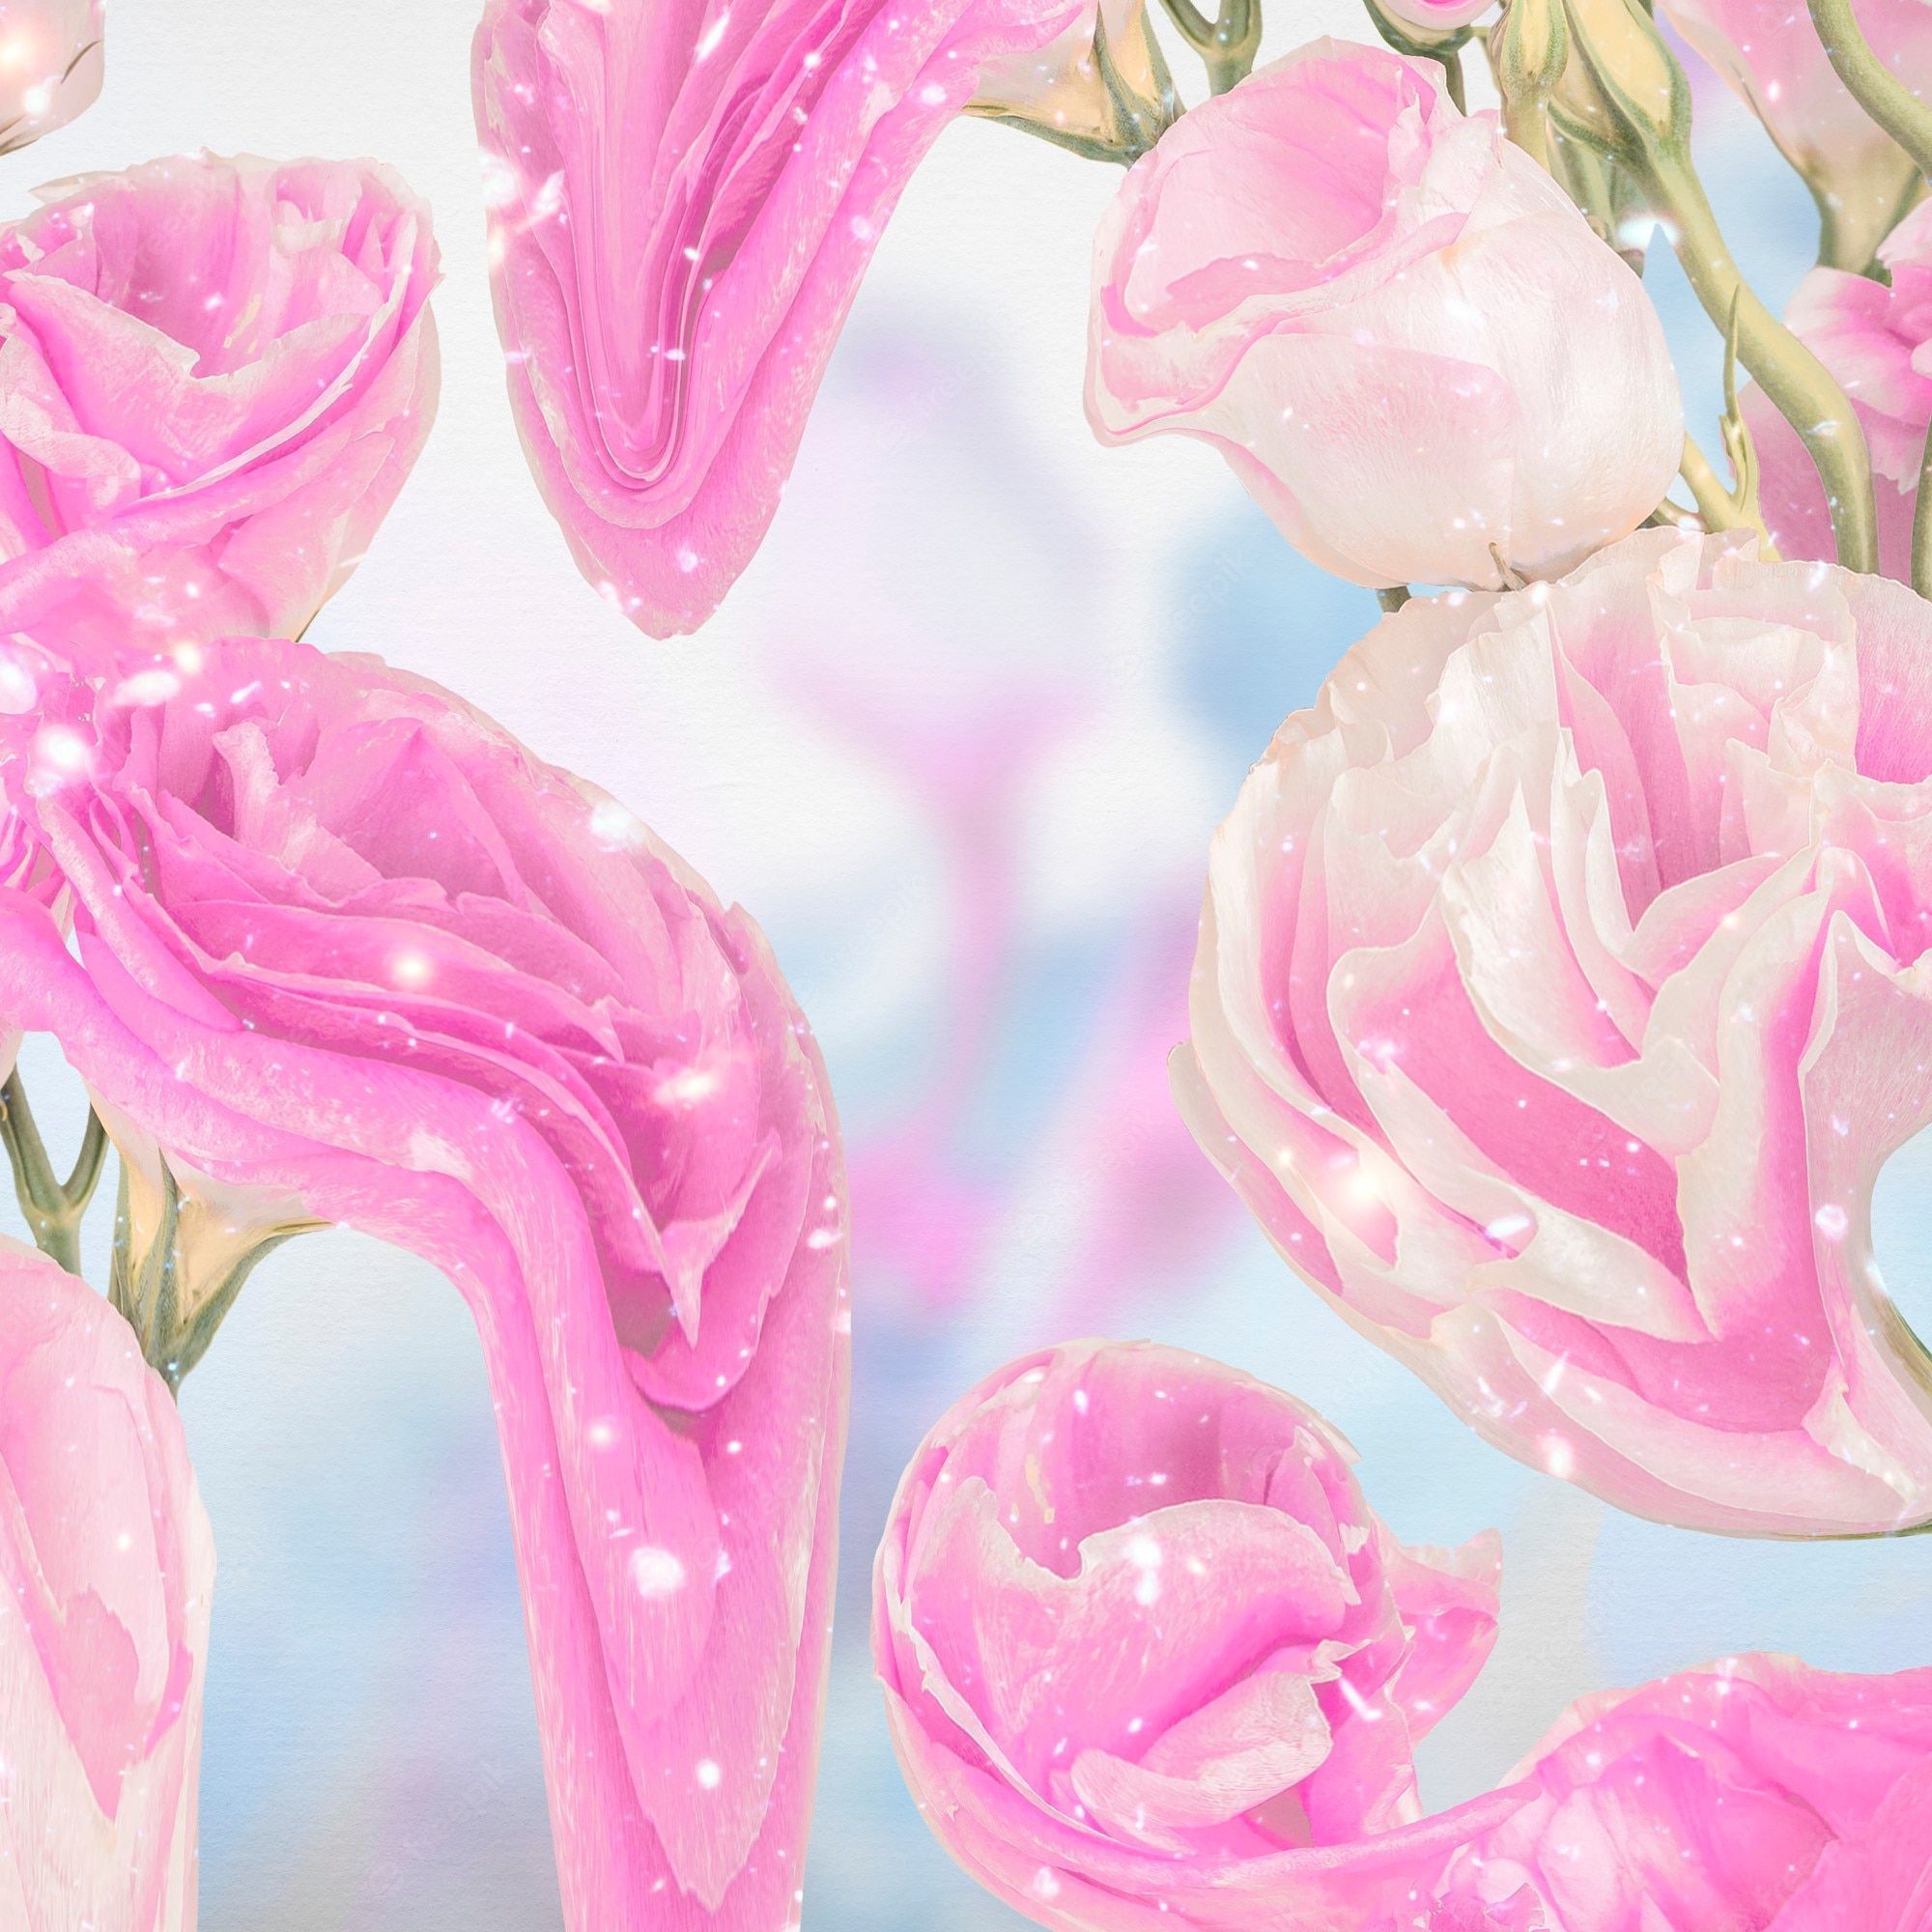 Free Photo. Pink floral background wallpaper, trippy aesthetic design